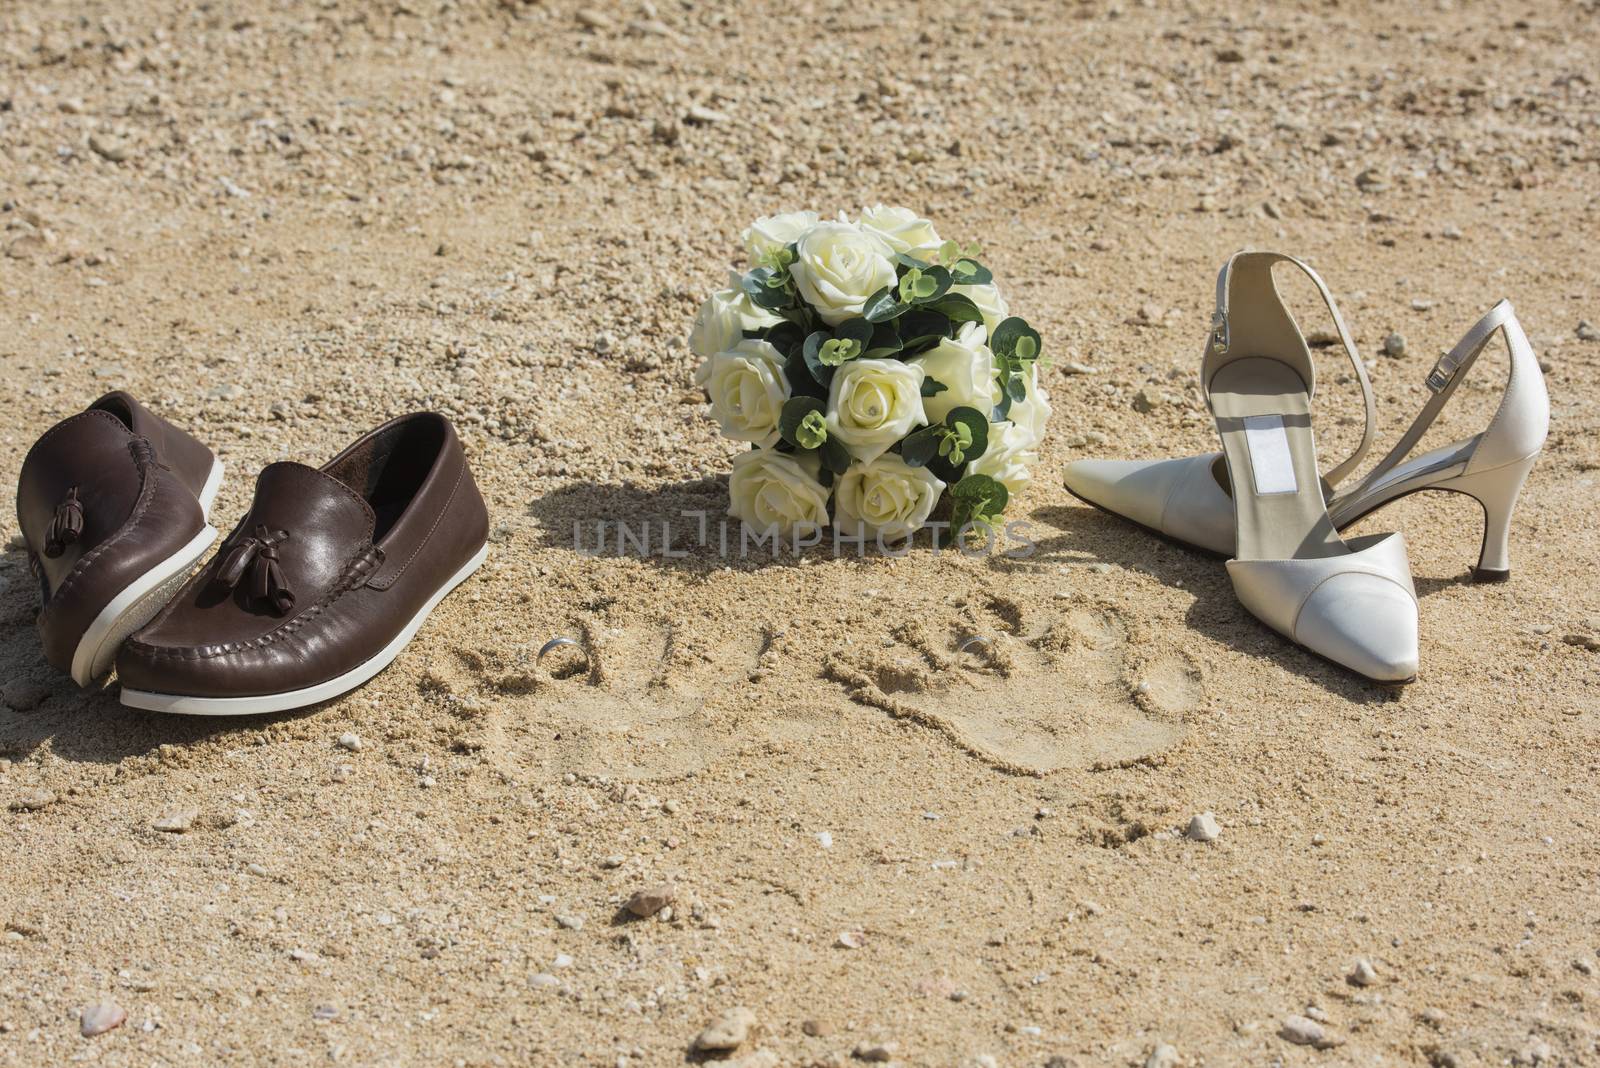 Bride and grooms shoes and handprints on beach in sand with wedding rings and bouquet